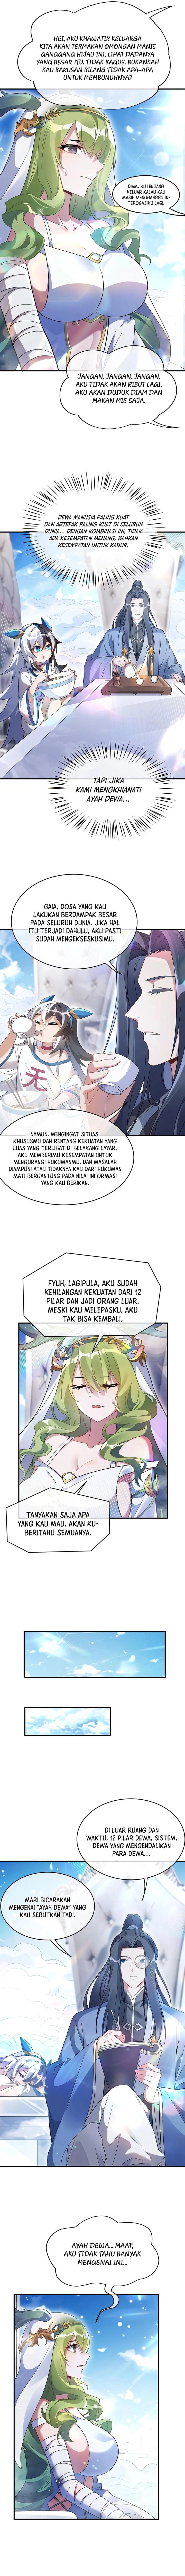 Dilarang COPAS - situs resmi www.mangacanblog.com - Komik my female apprentices are all big shots from the future 252 - chapter 252 253 Indonesia my female apprentices are all big shots from the future 252 - chapter 252 Terbaru 1|Baca Manga Komik Indonesia|Mangacan